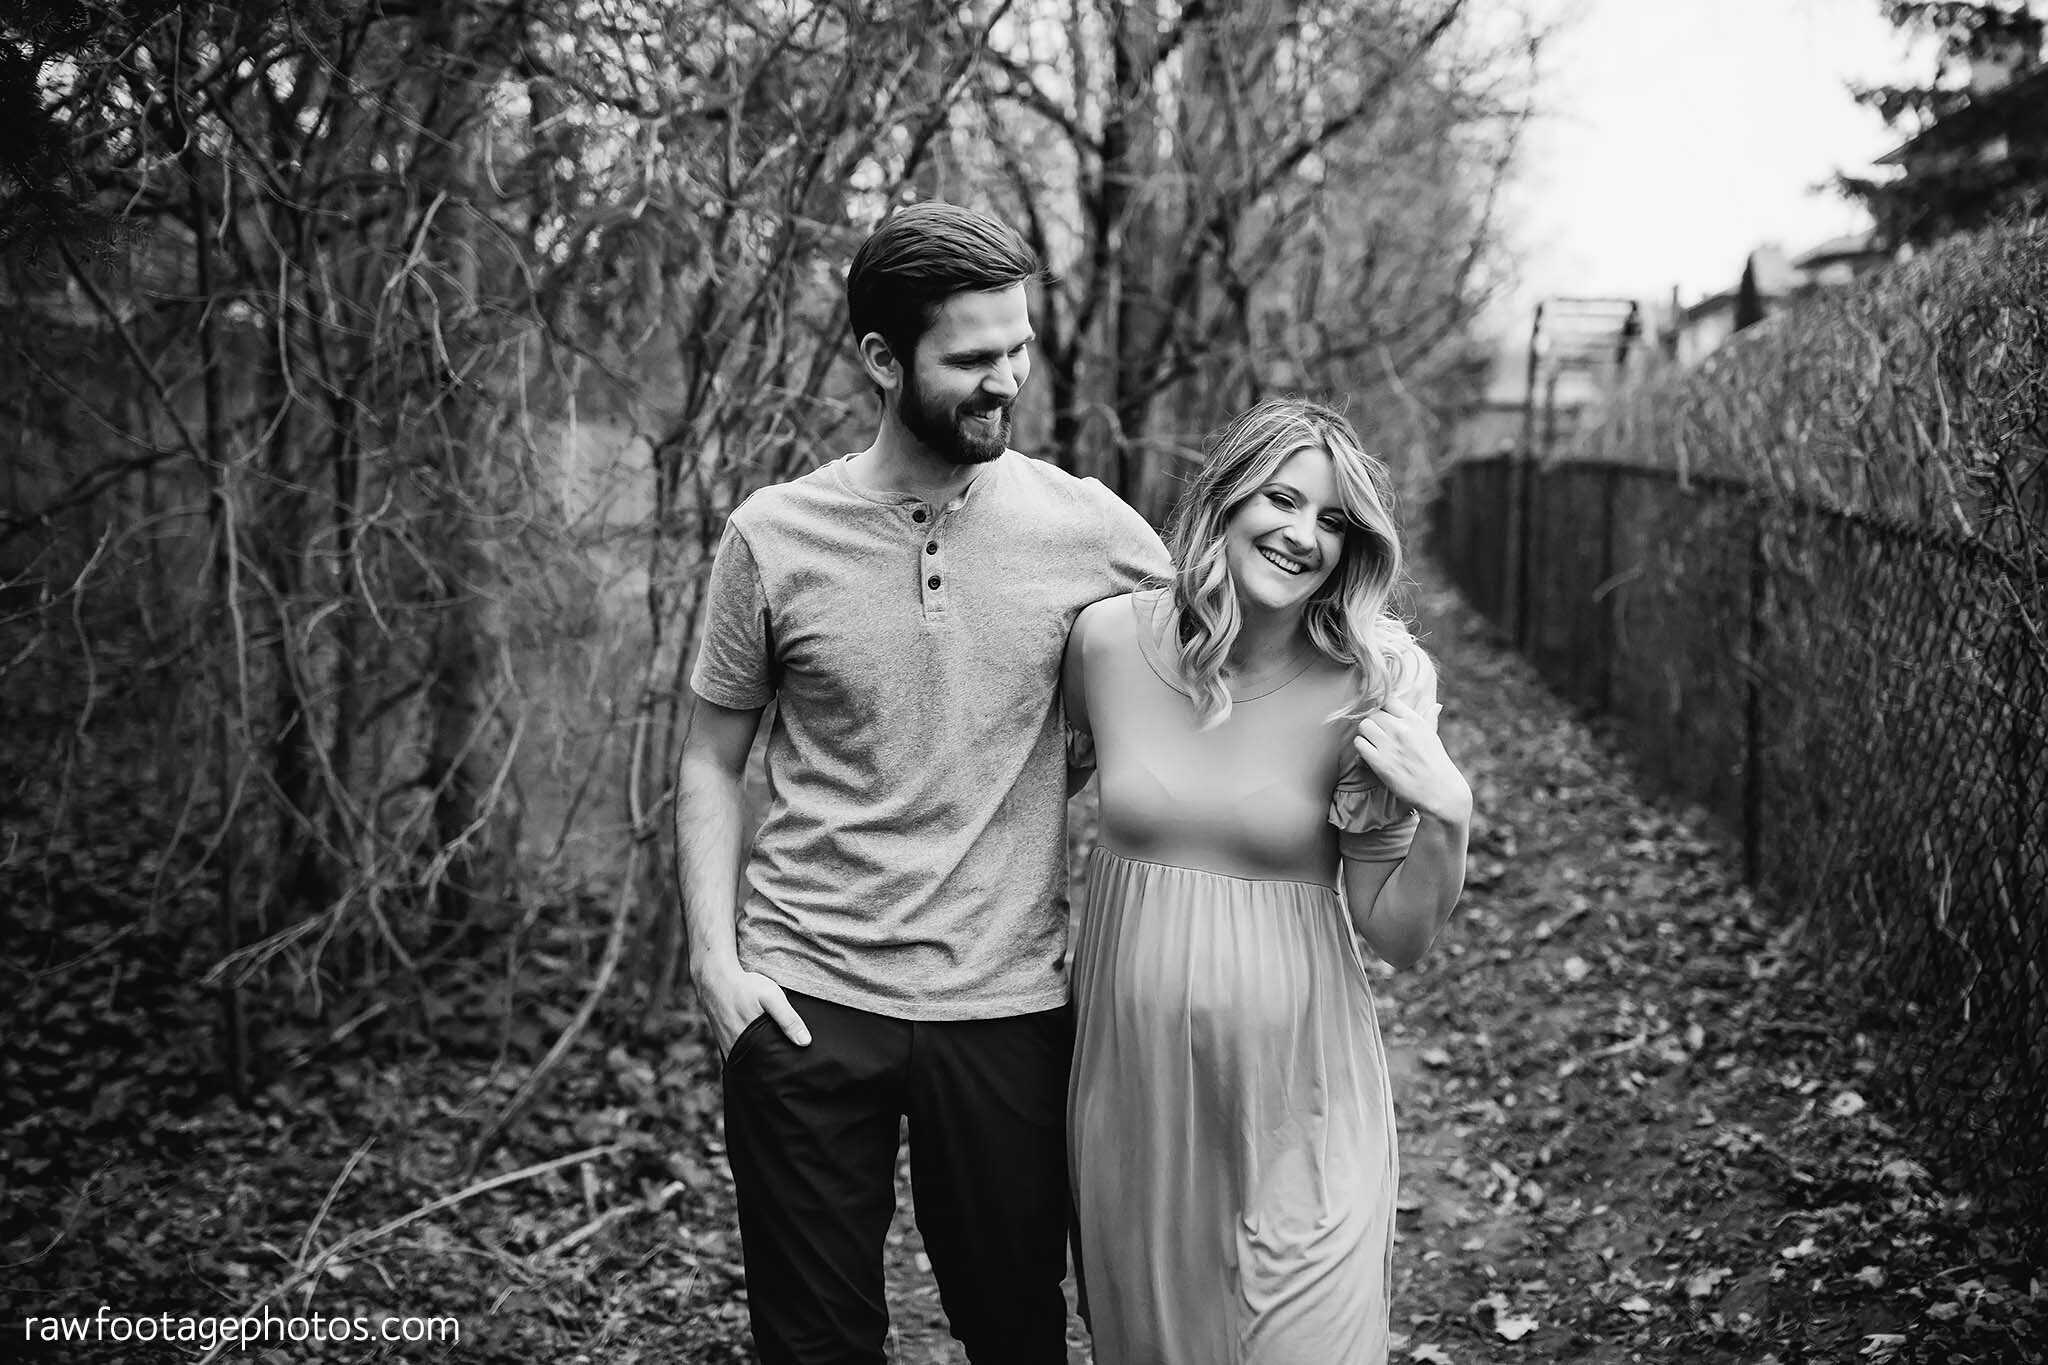 london_ontario_maternity_photographer-raw_footage_photography-in_home_lifestyle_maternity-forest_maternity_session-yellow_maternity_dress_037.jpg